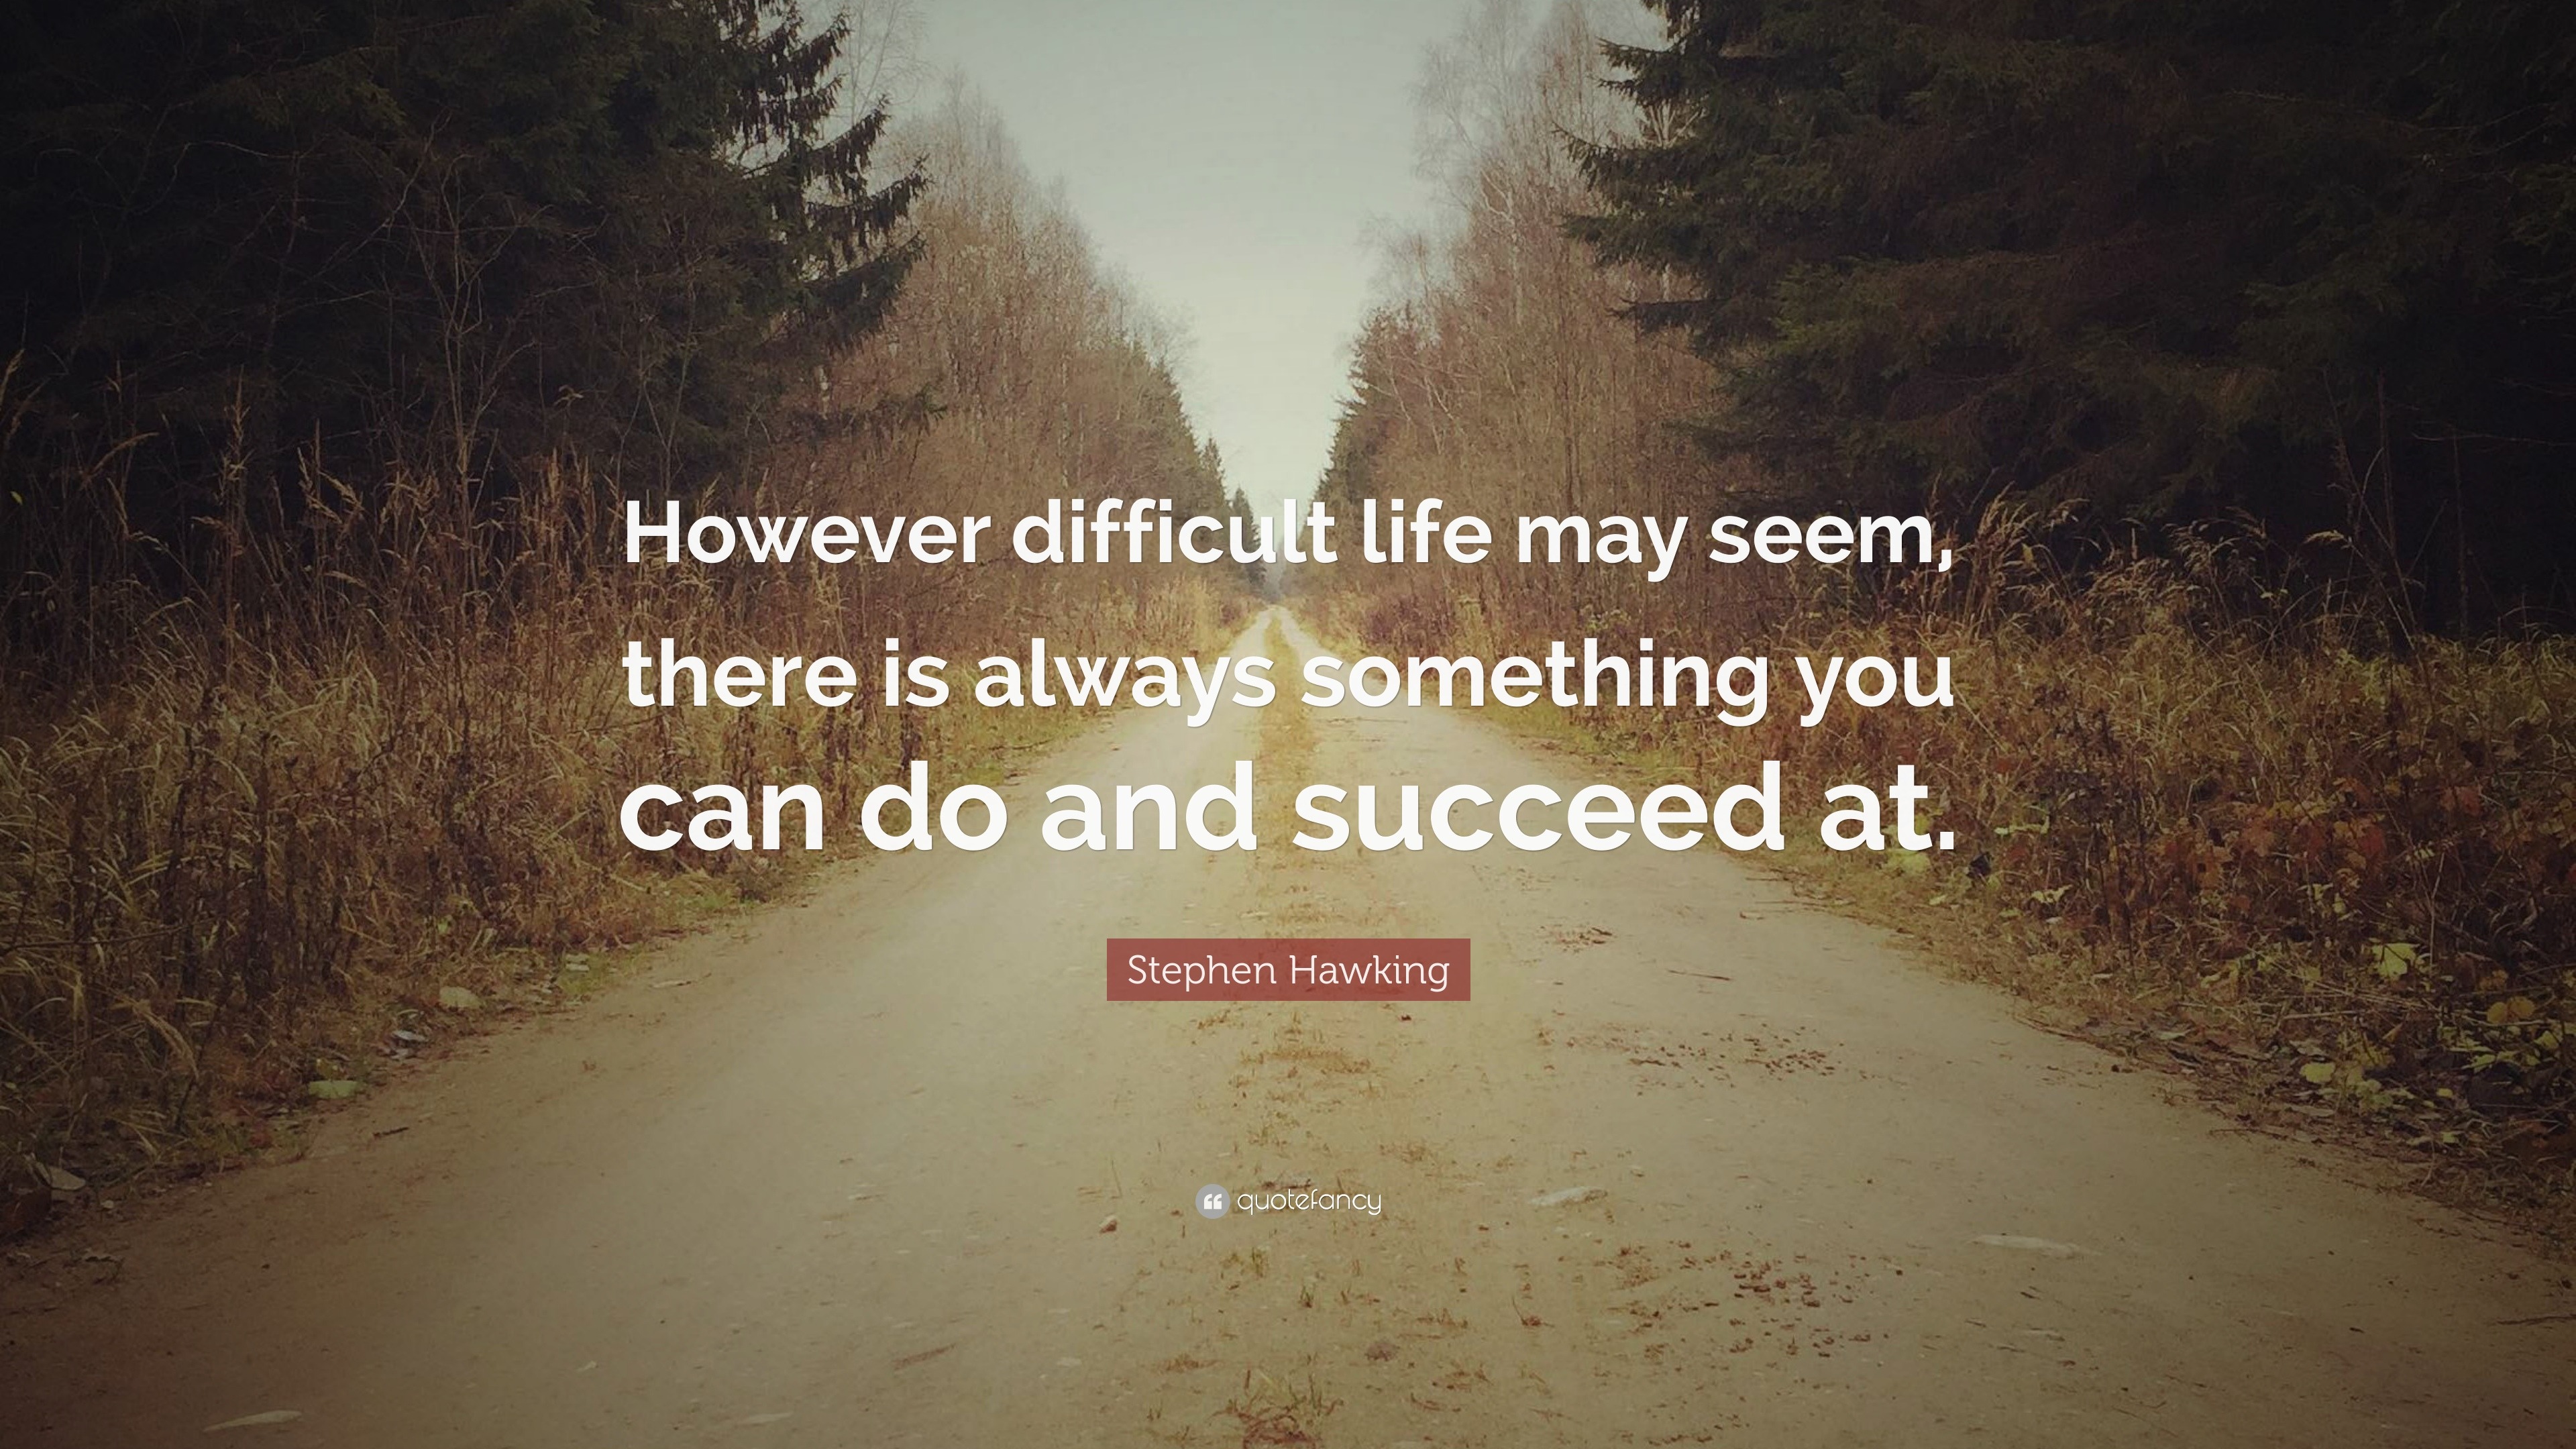 Stephen Hawking Quote “However difficult life may seem